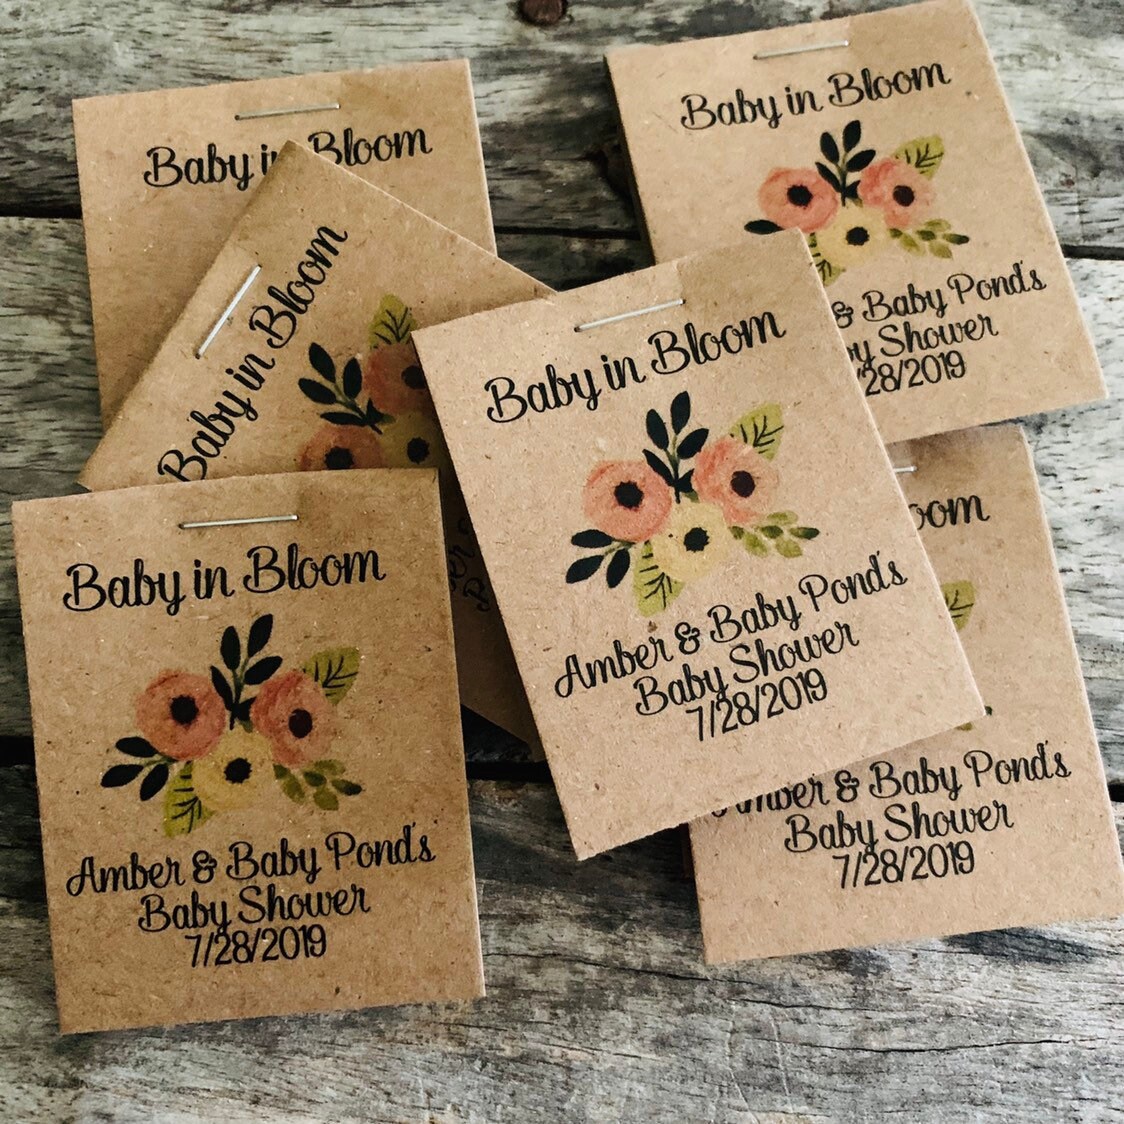 Flower Seed Packets - An Inexpensive Baby or Bridal Shower Favor